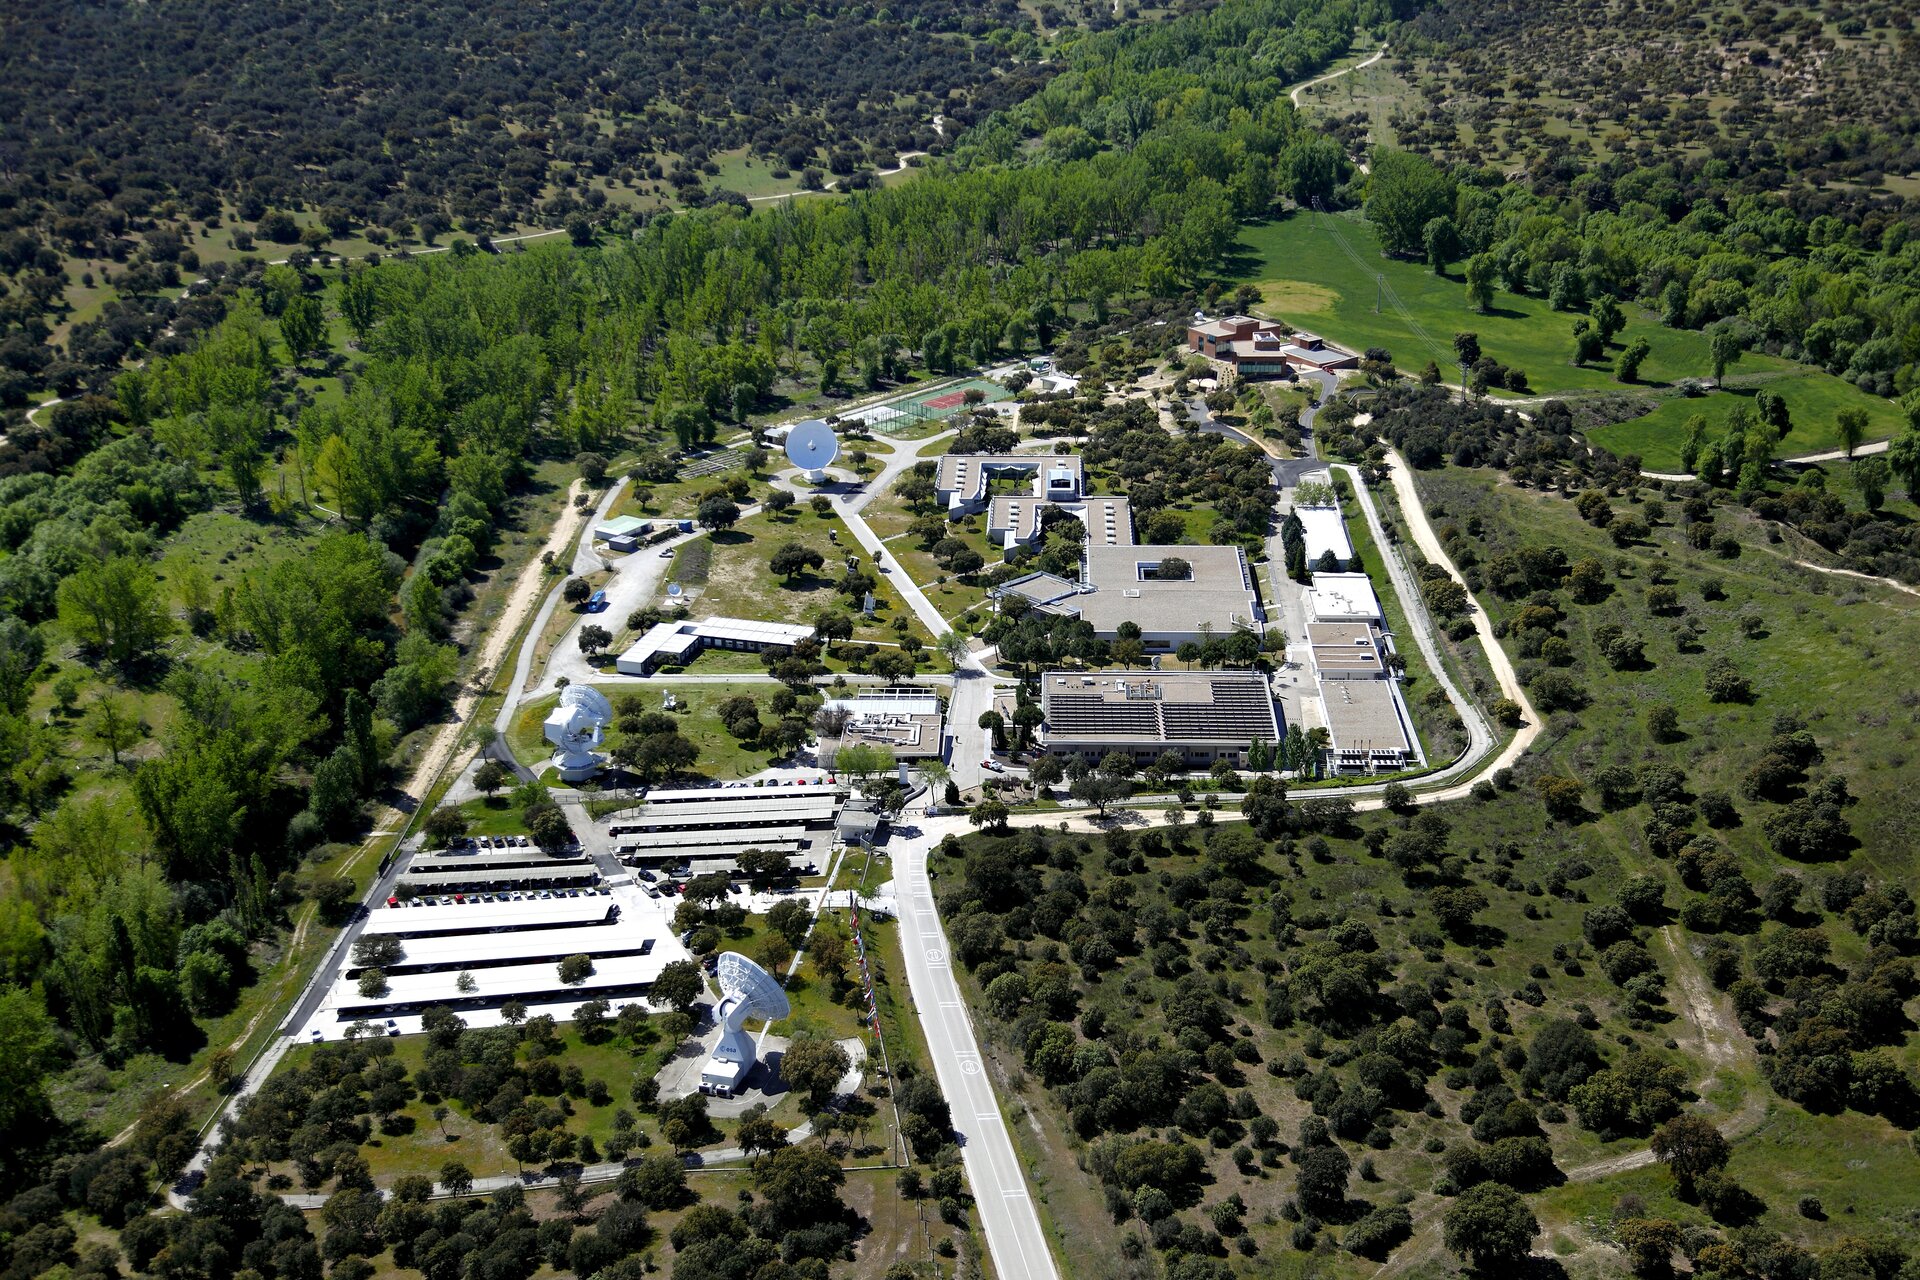 Aerial view of ESAC from the main entrance, 2014